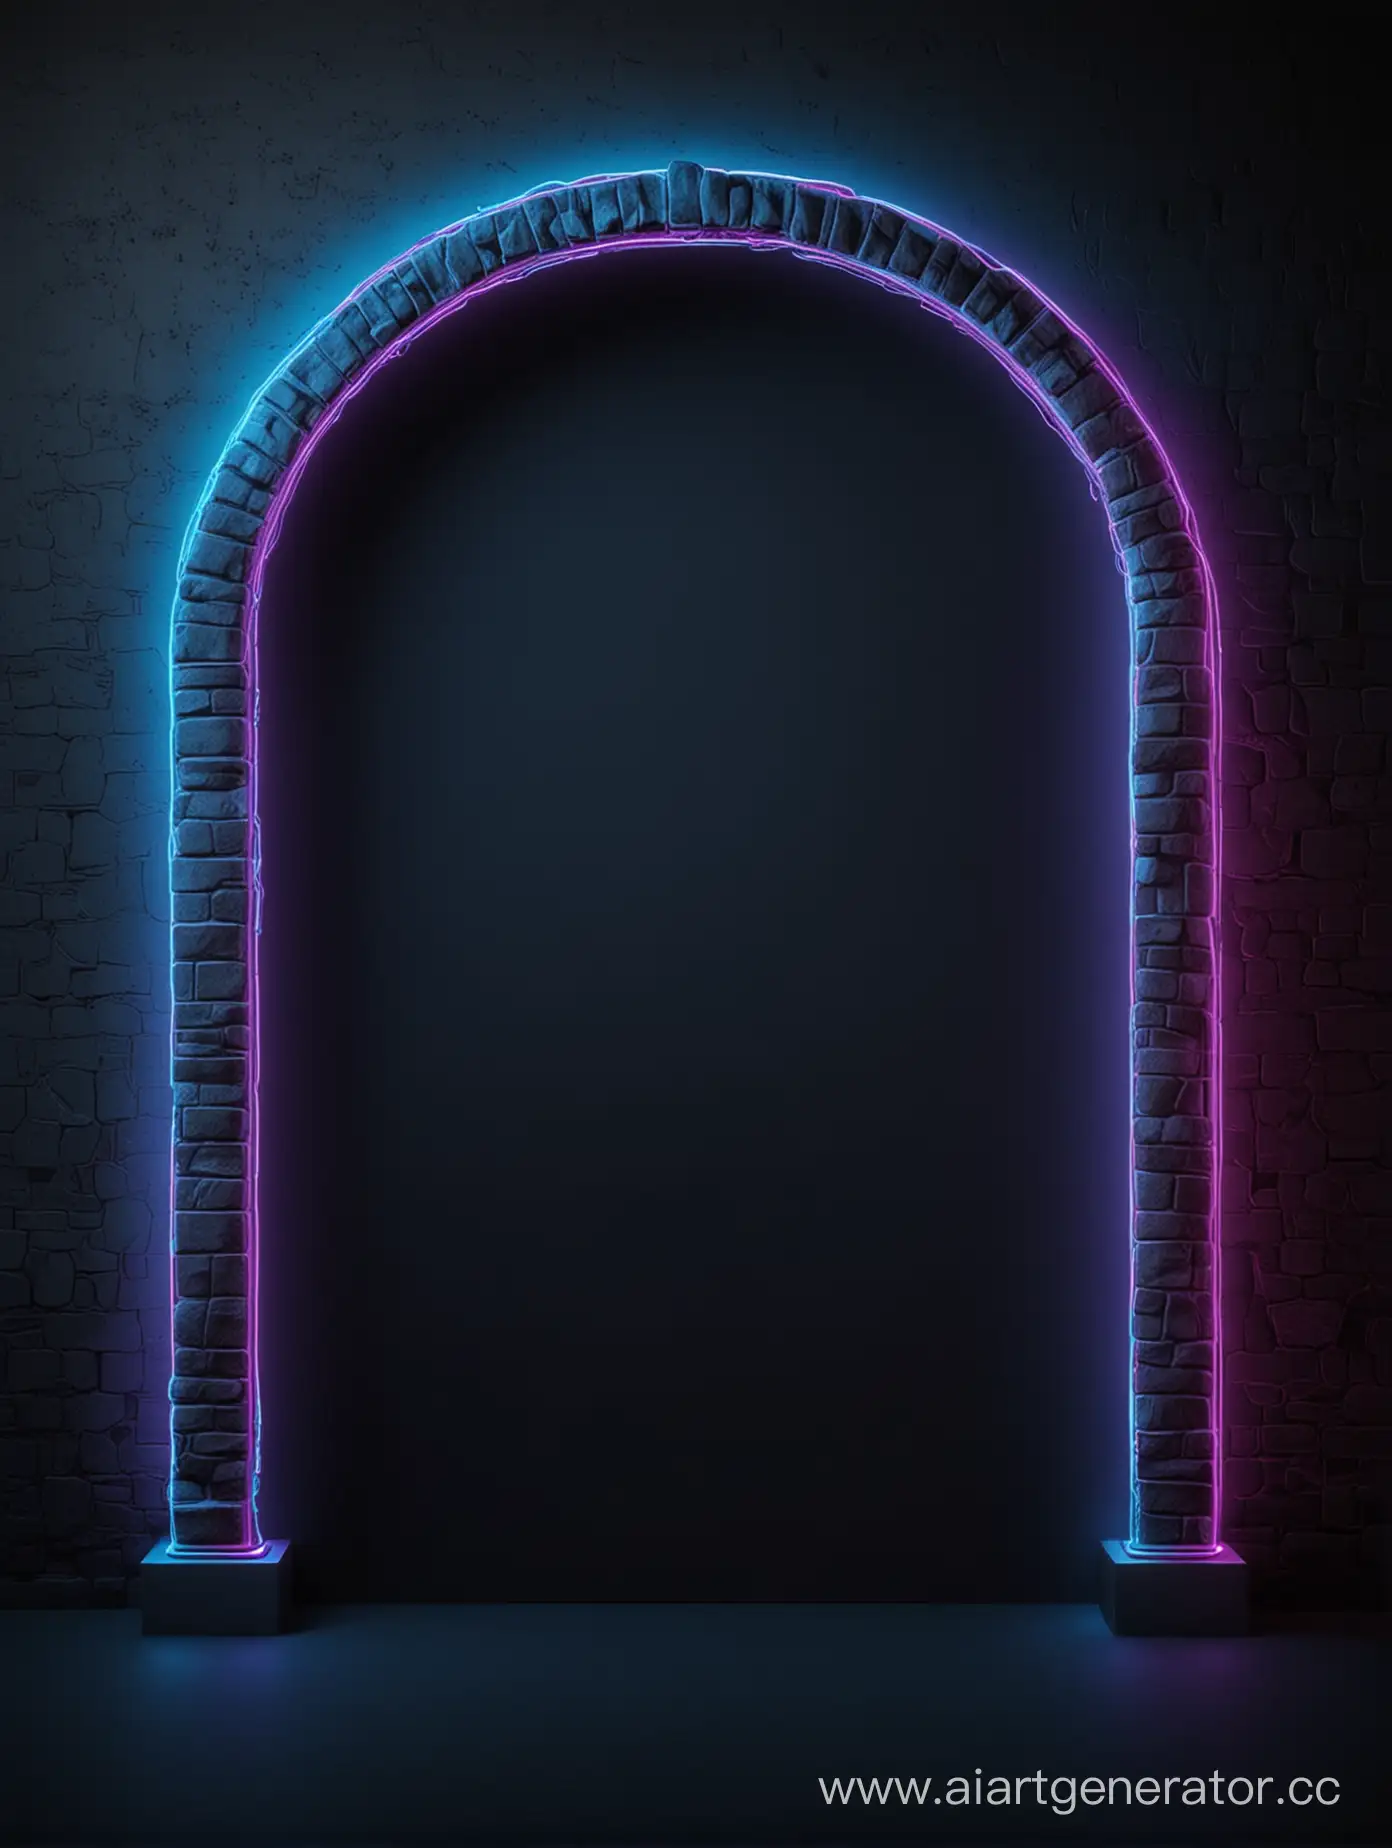 Vibrant-Neon-Blue-Arch-Against-a-Mysterious-Dark-Background